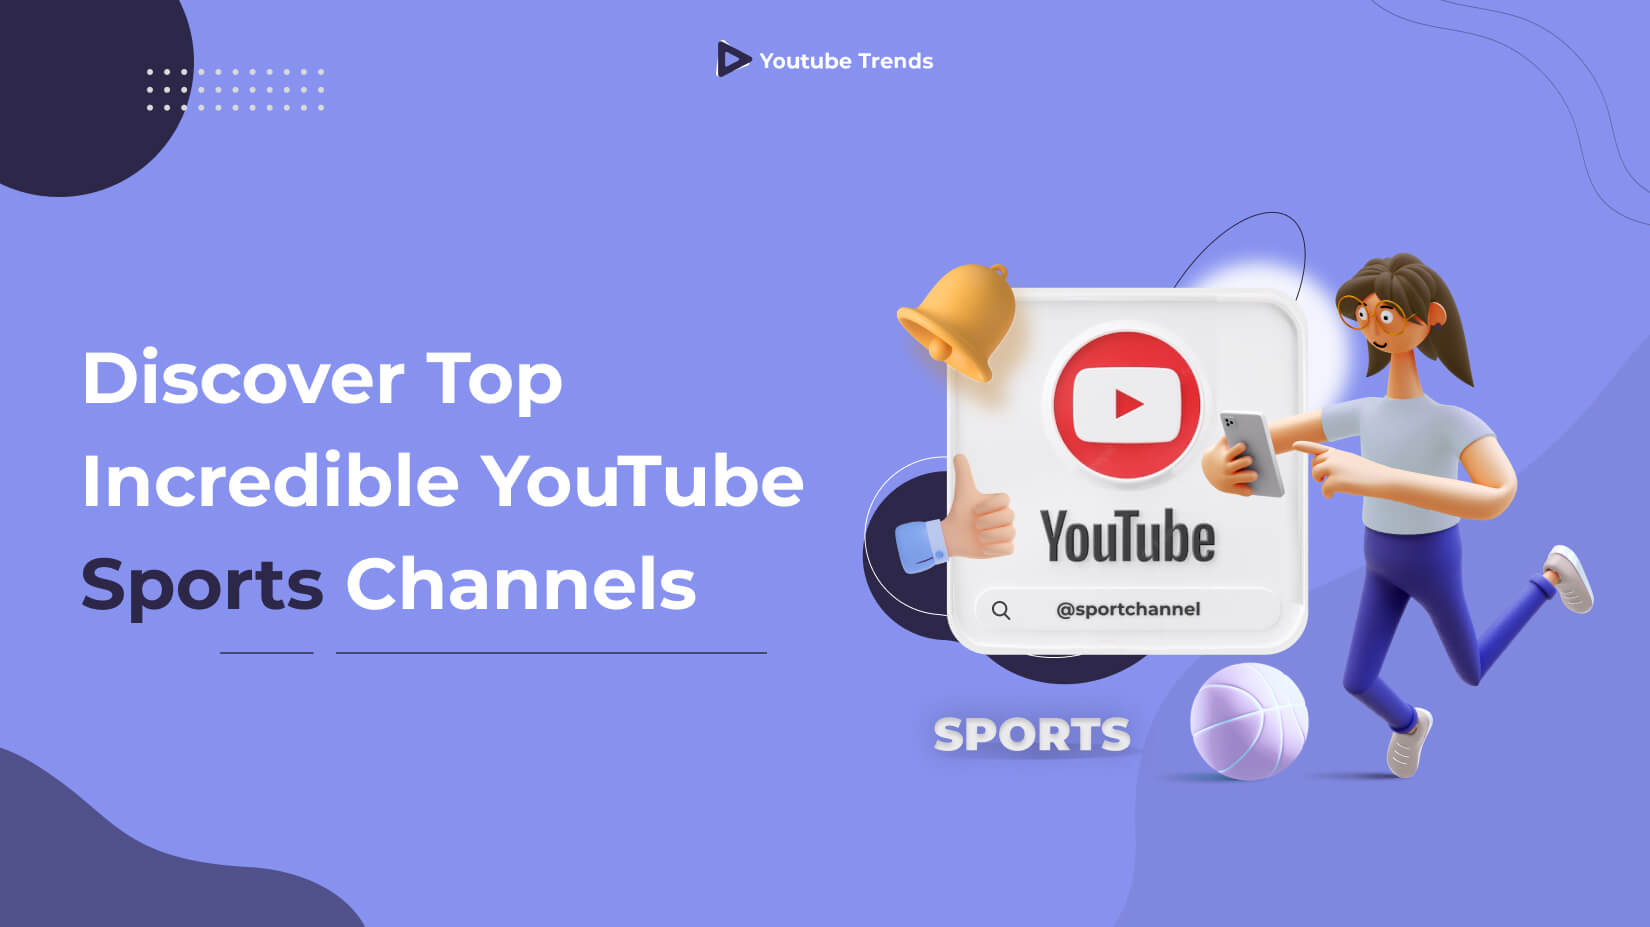 Discover Top Incredible YouTube Sports Channels